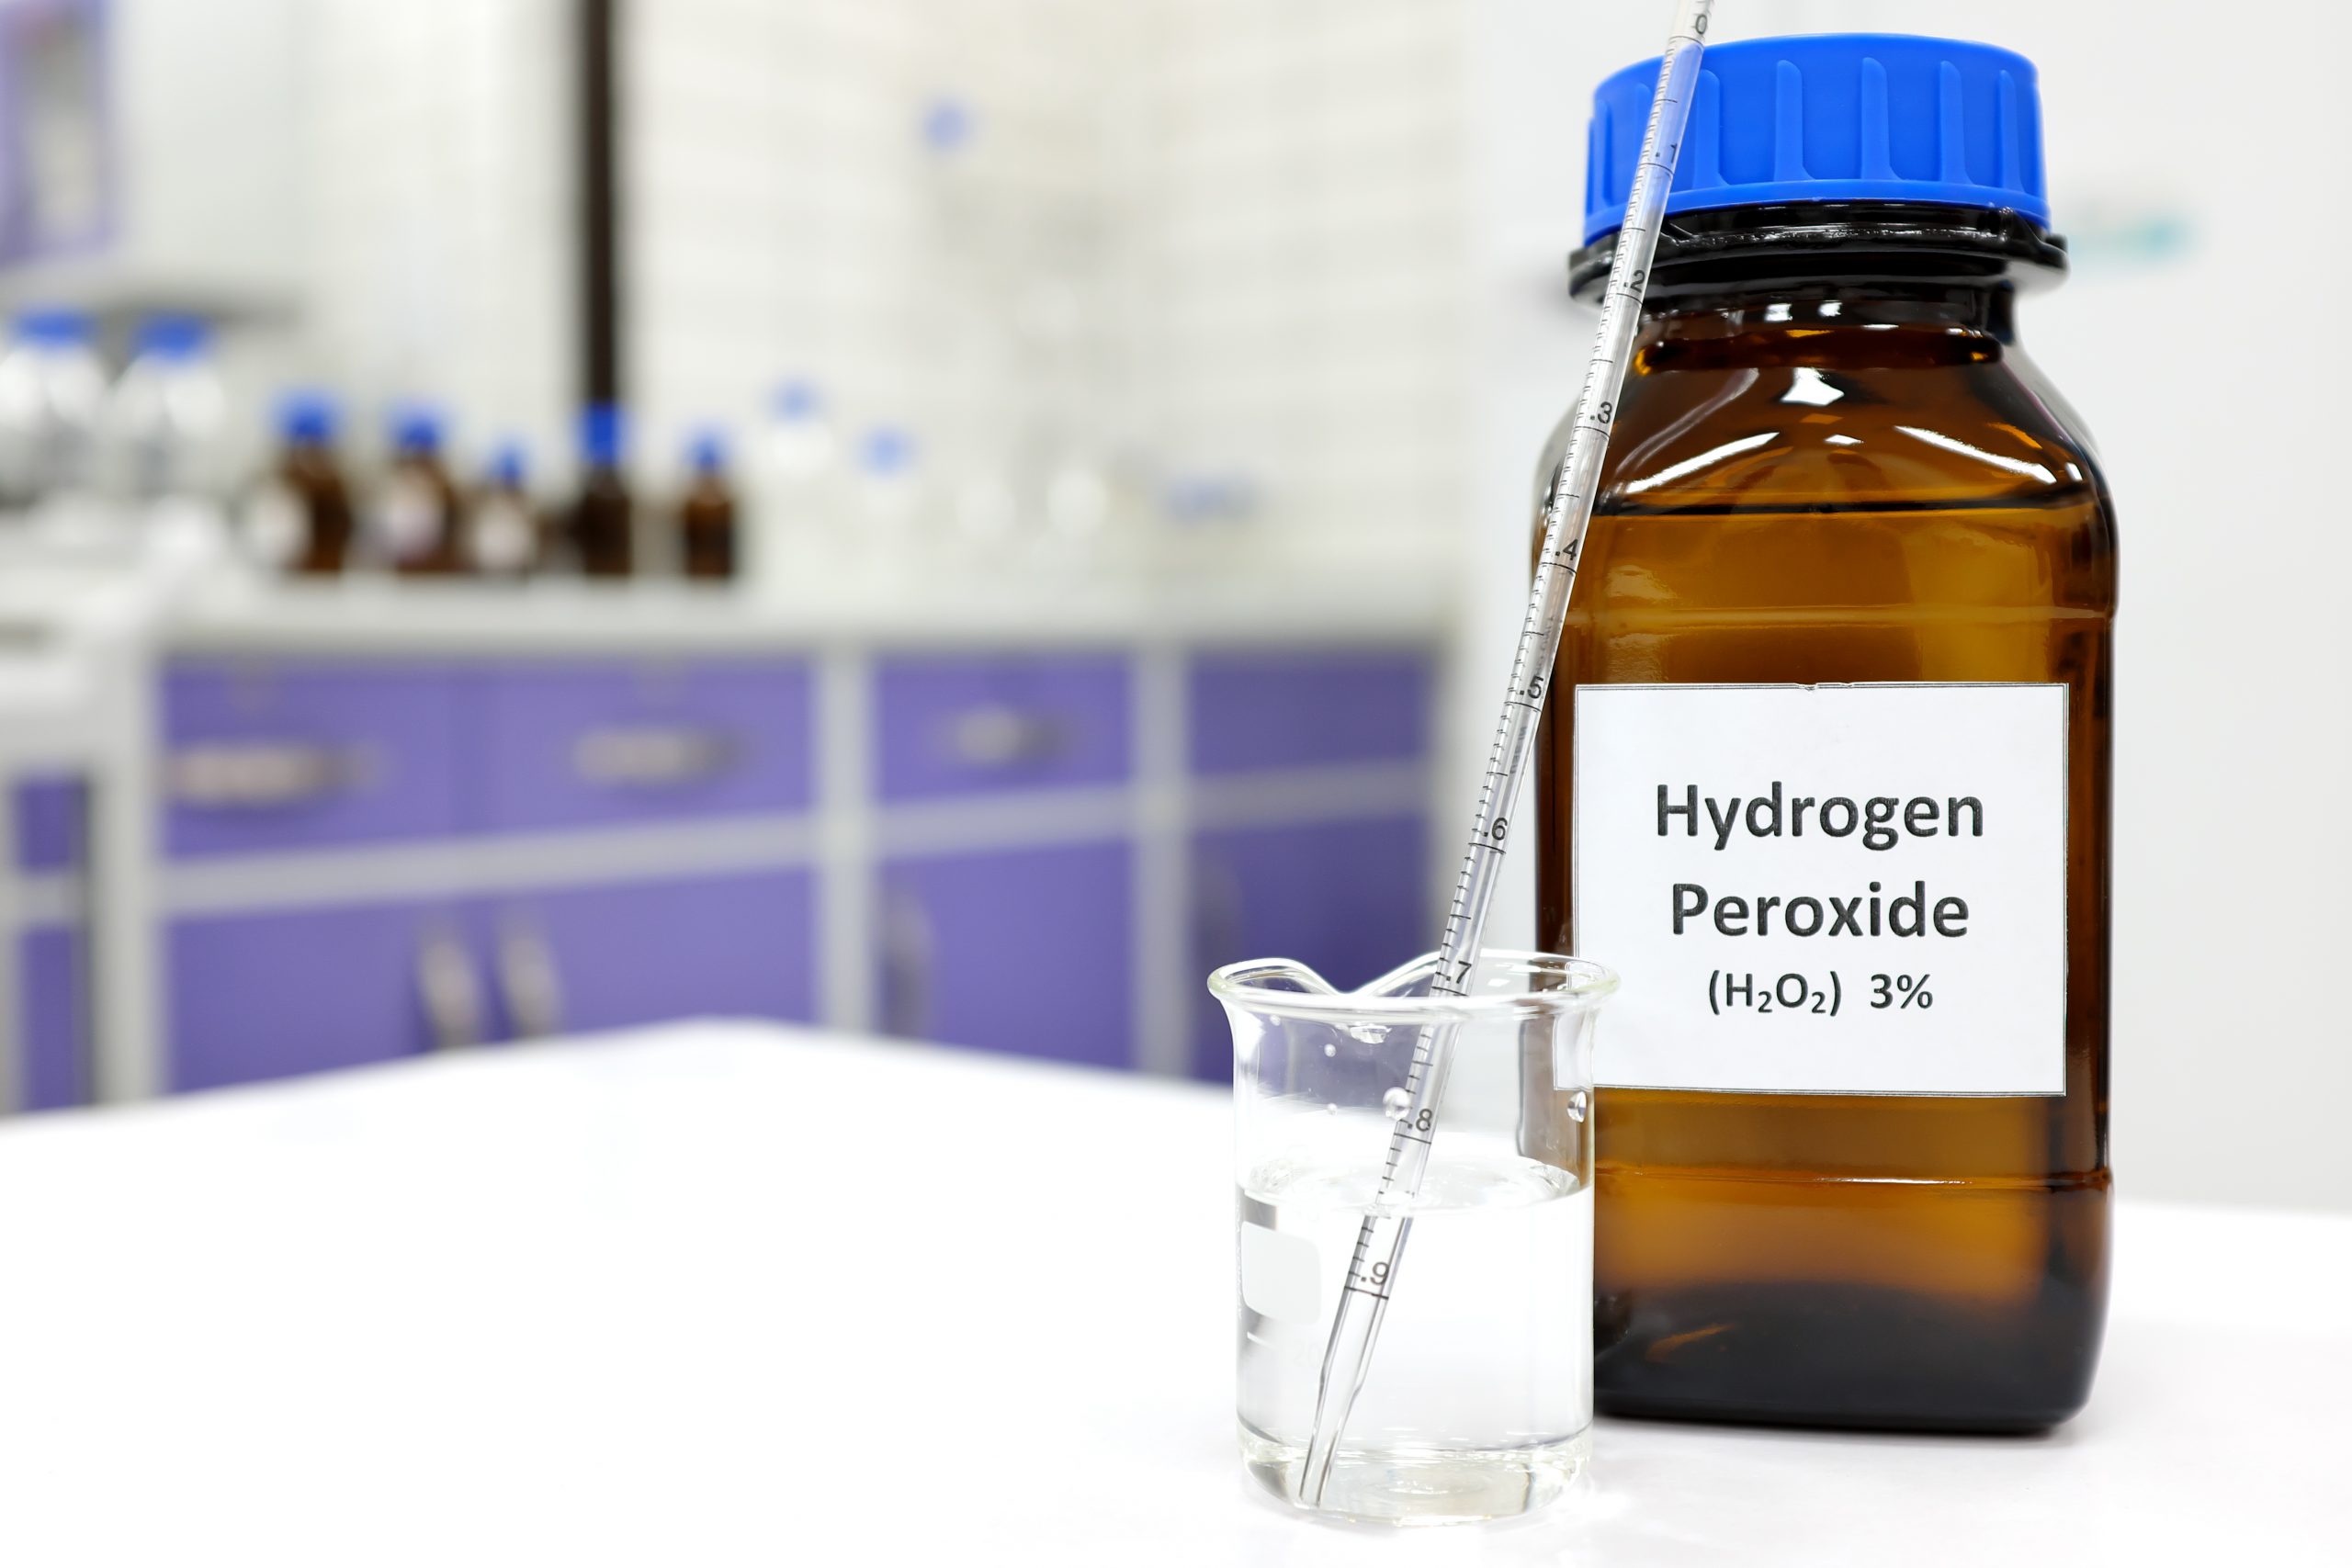 h202 bottle in a laboratory.